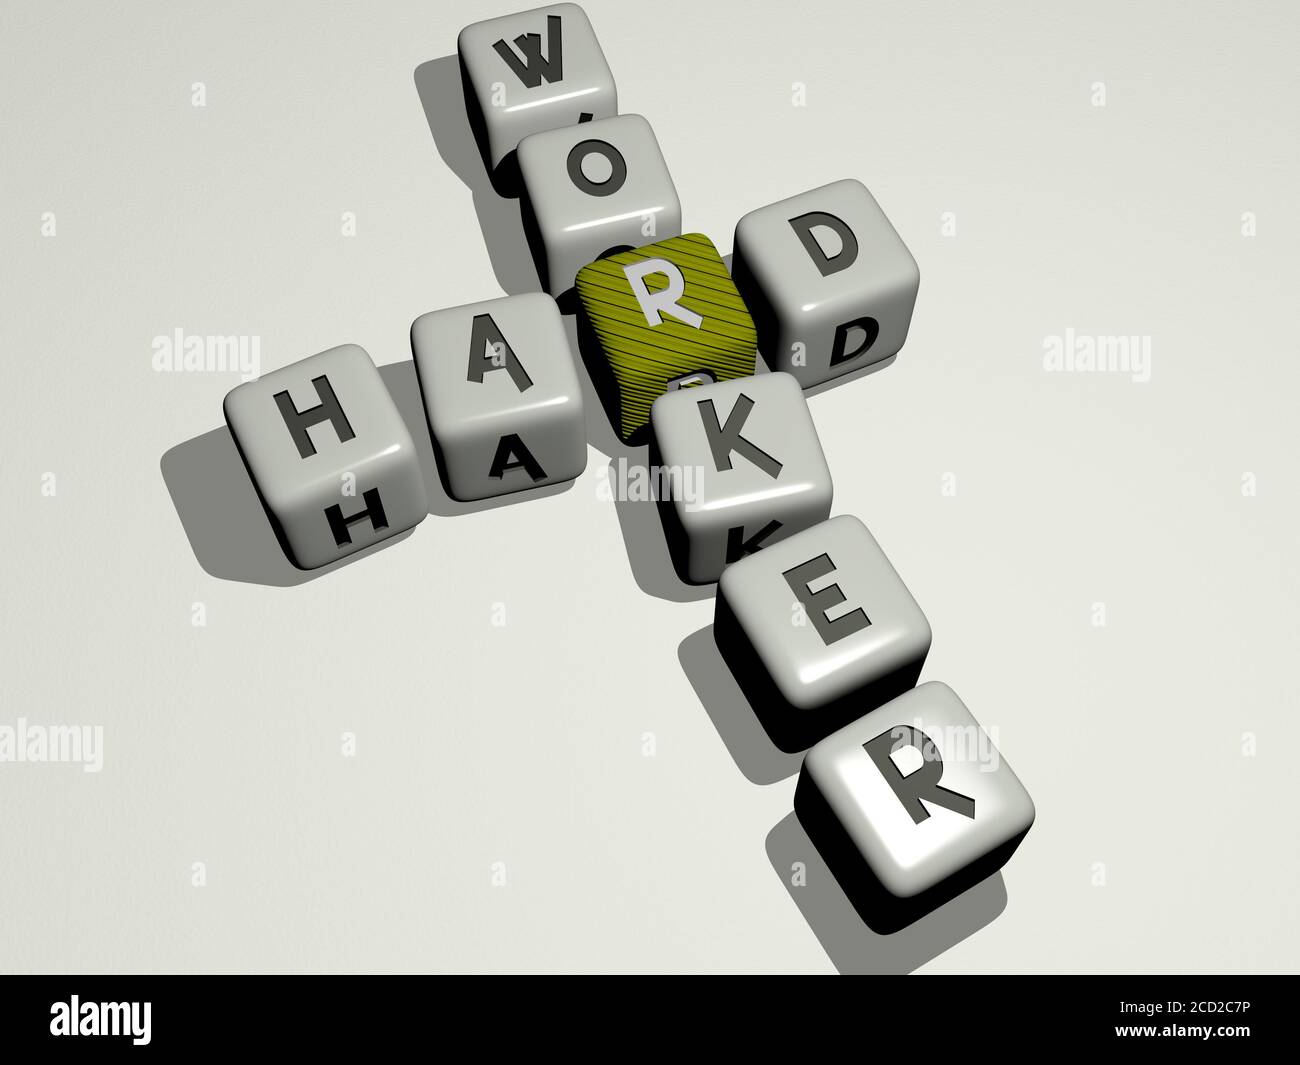 HARD WORKER crossword by cubic dice letters 3D illustration Stock